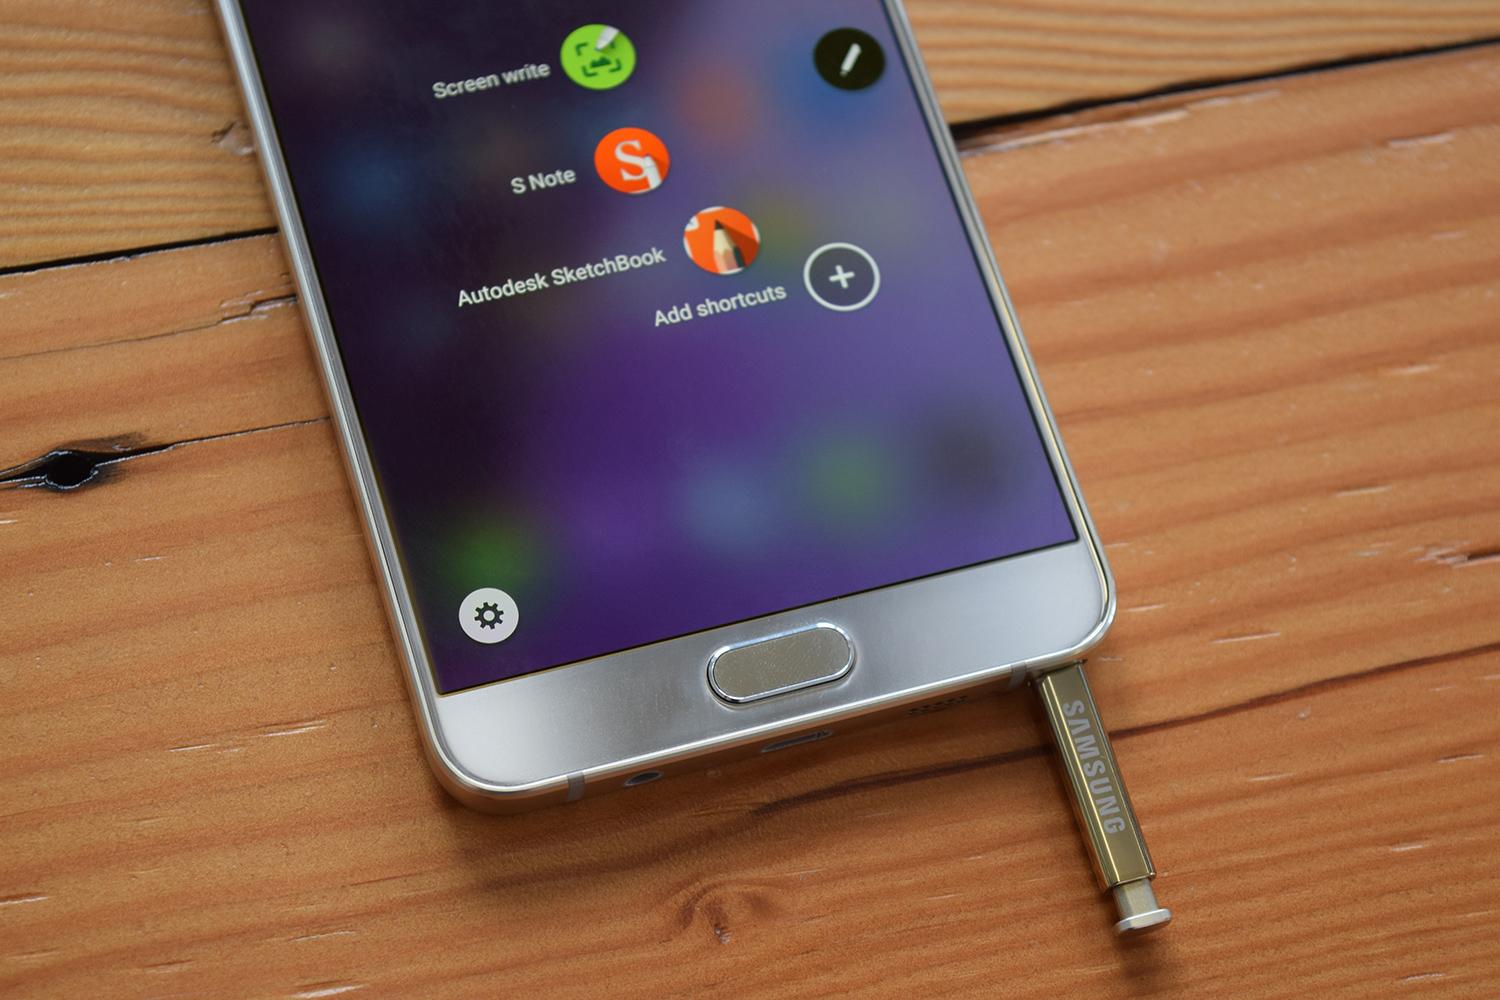 What An Indisputable Feel Like, In Terms Of A User, Galaxy Note 5